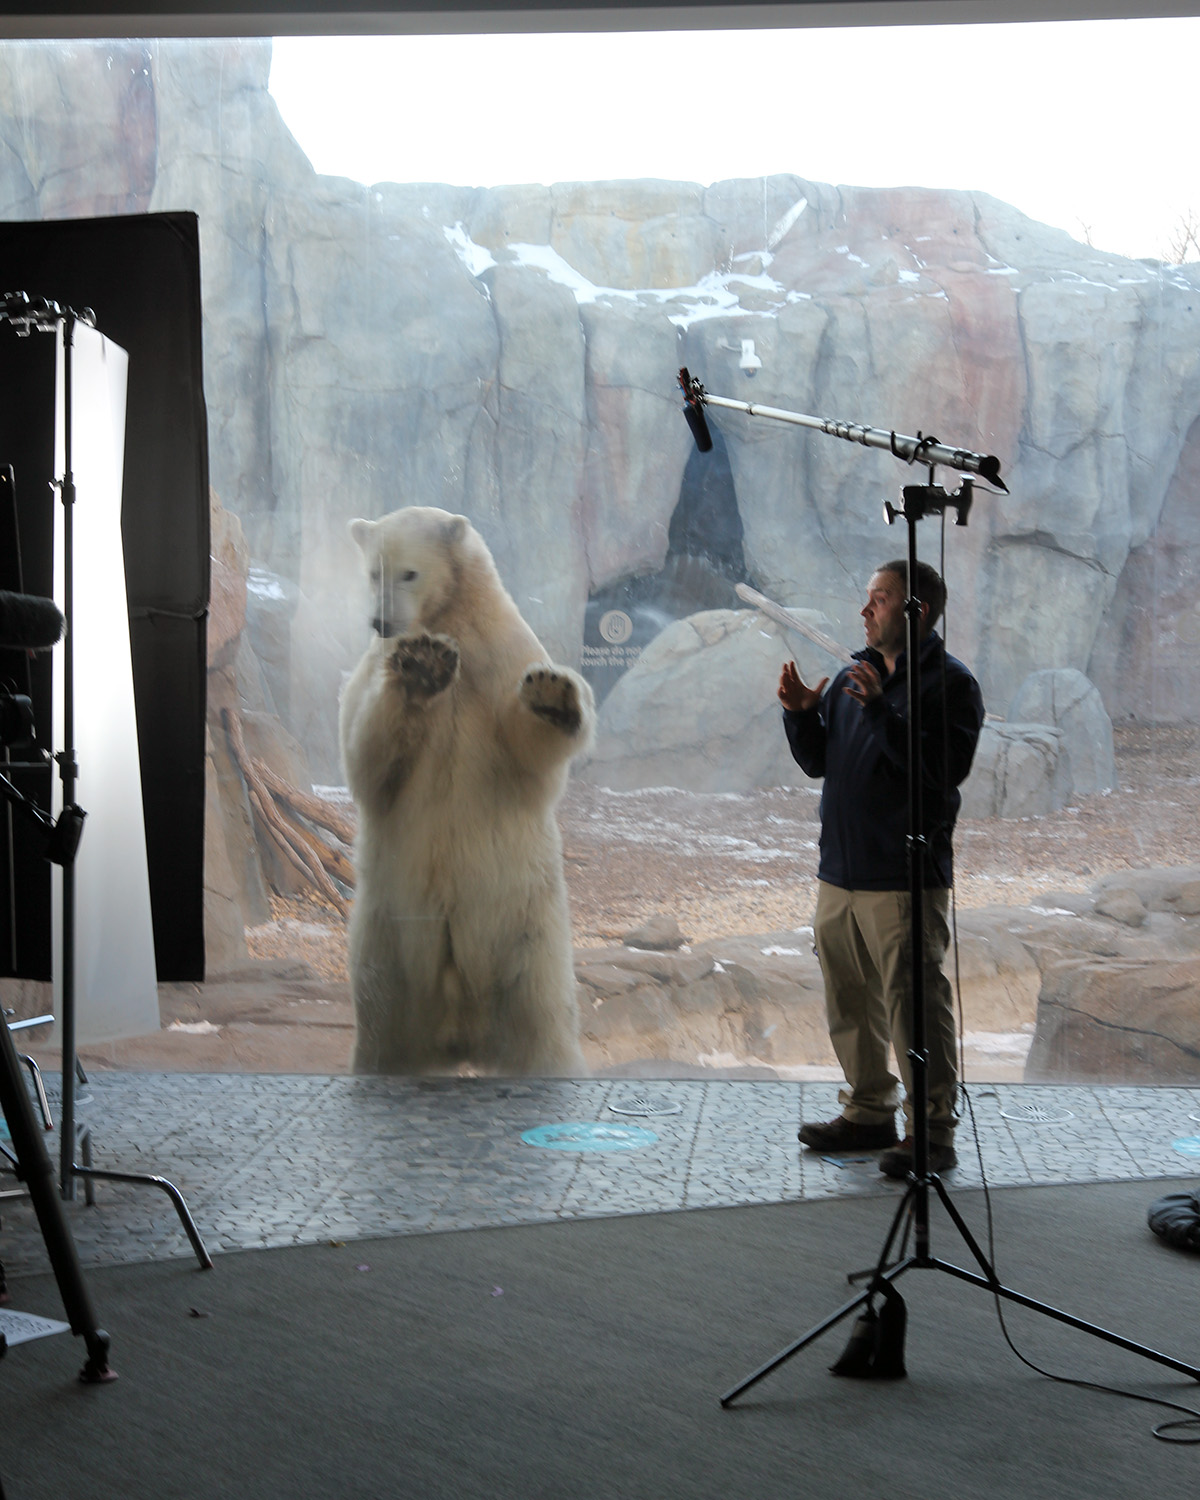 Dr Chris Enright filming Arctic Vets interview with polar bear in the background